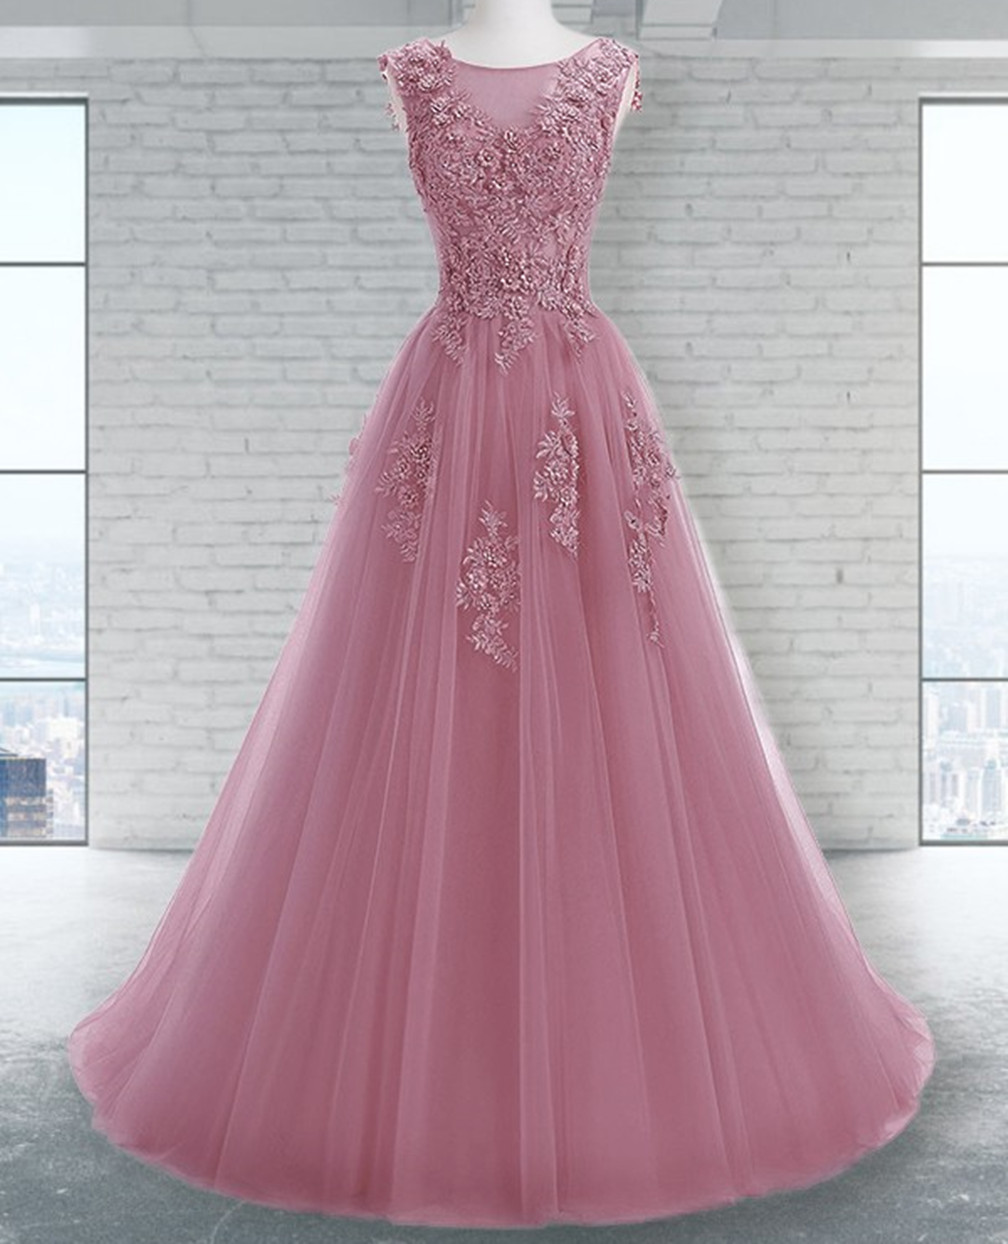 Women A-line/princess Lace Prom Dresses Long Appliques Evening Party Gowns Sleeveless Formal Dress Yp077